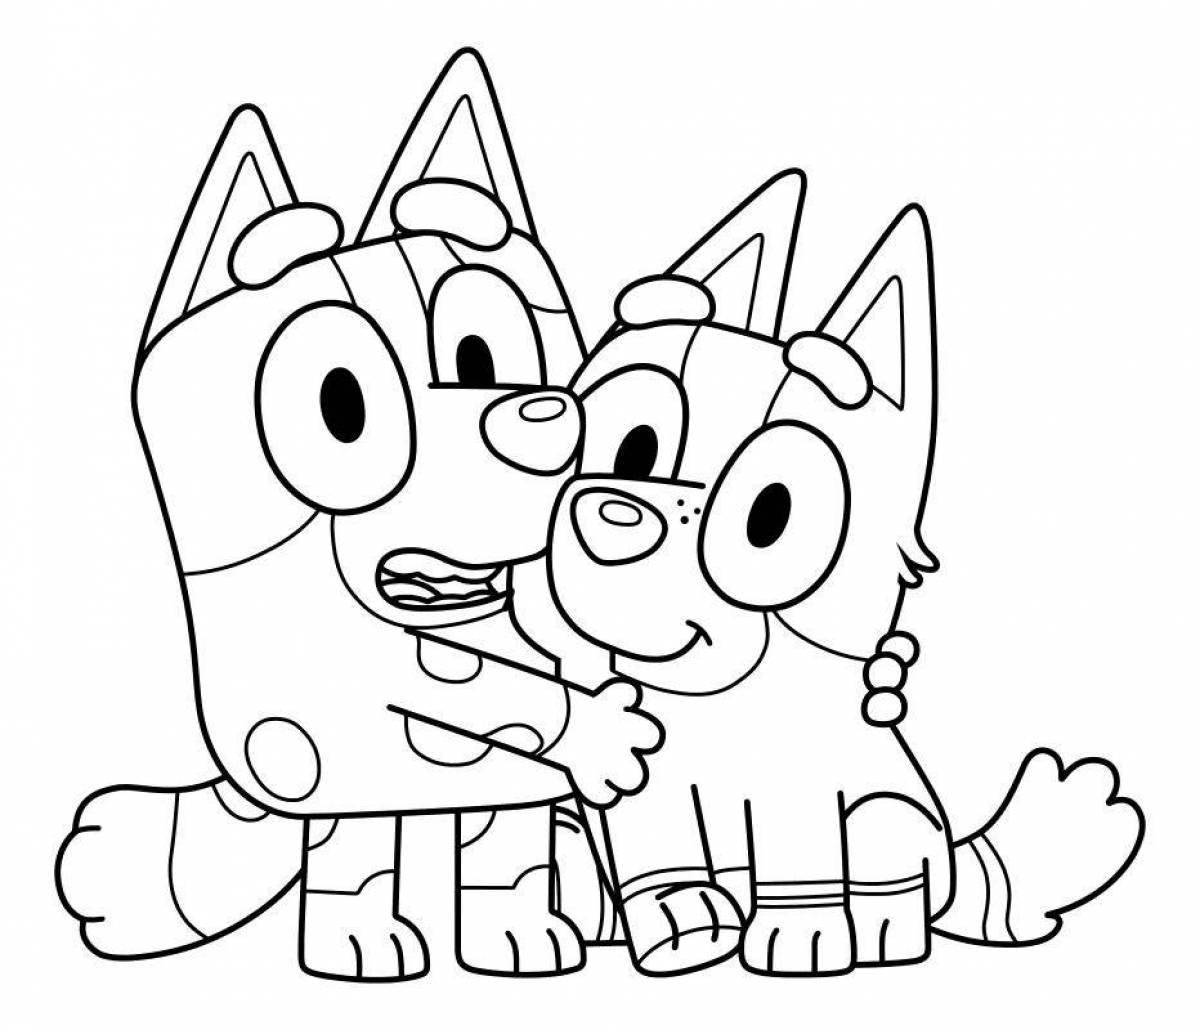 Lex and Plu humorous coloring pages